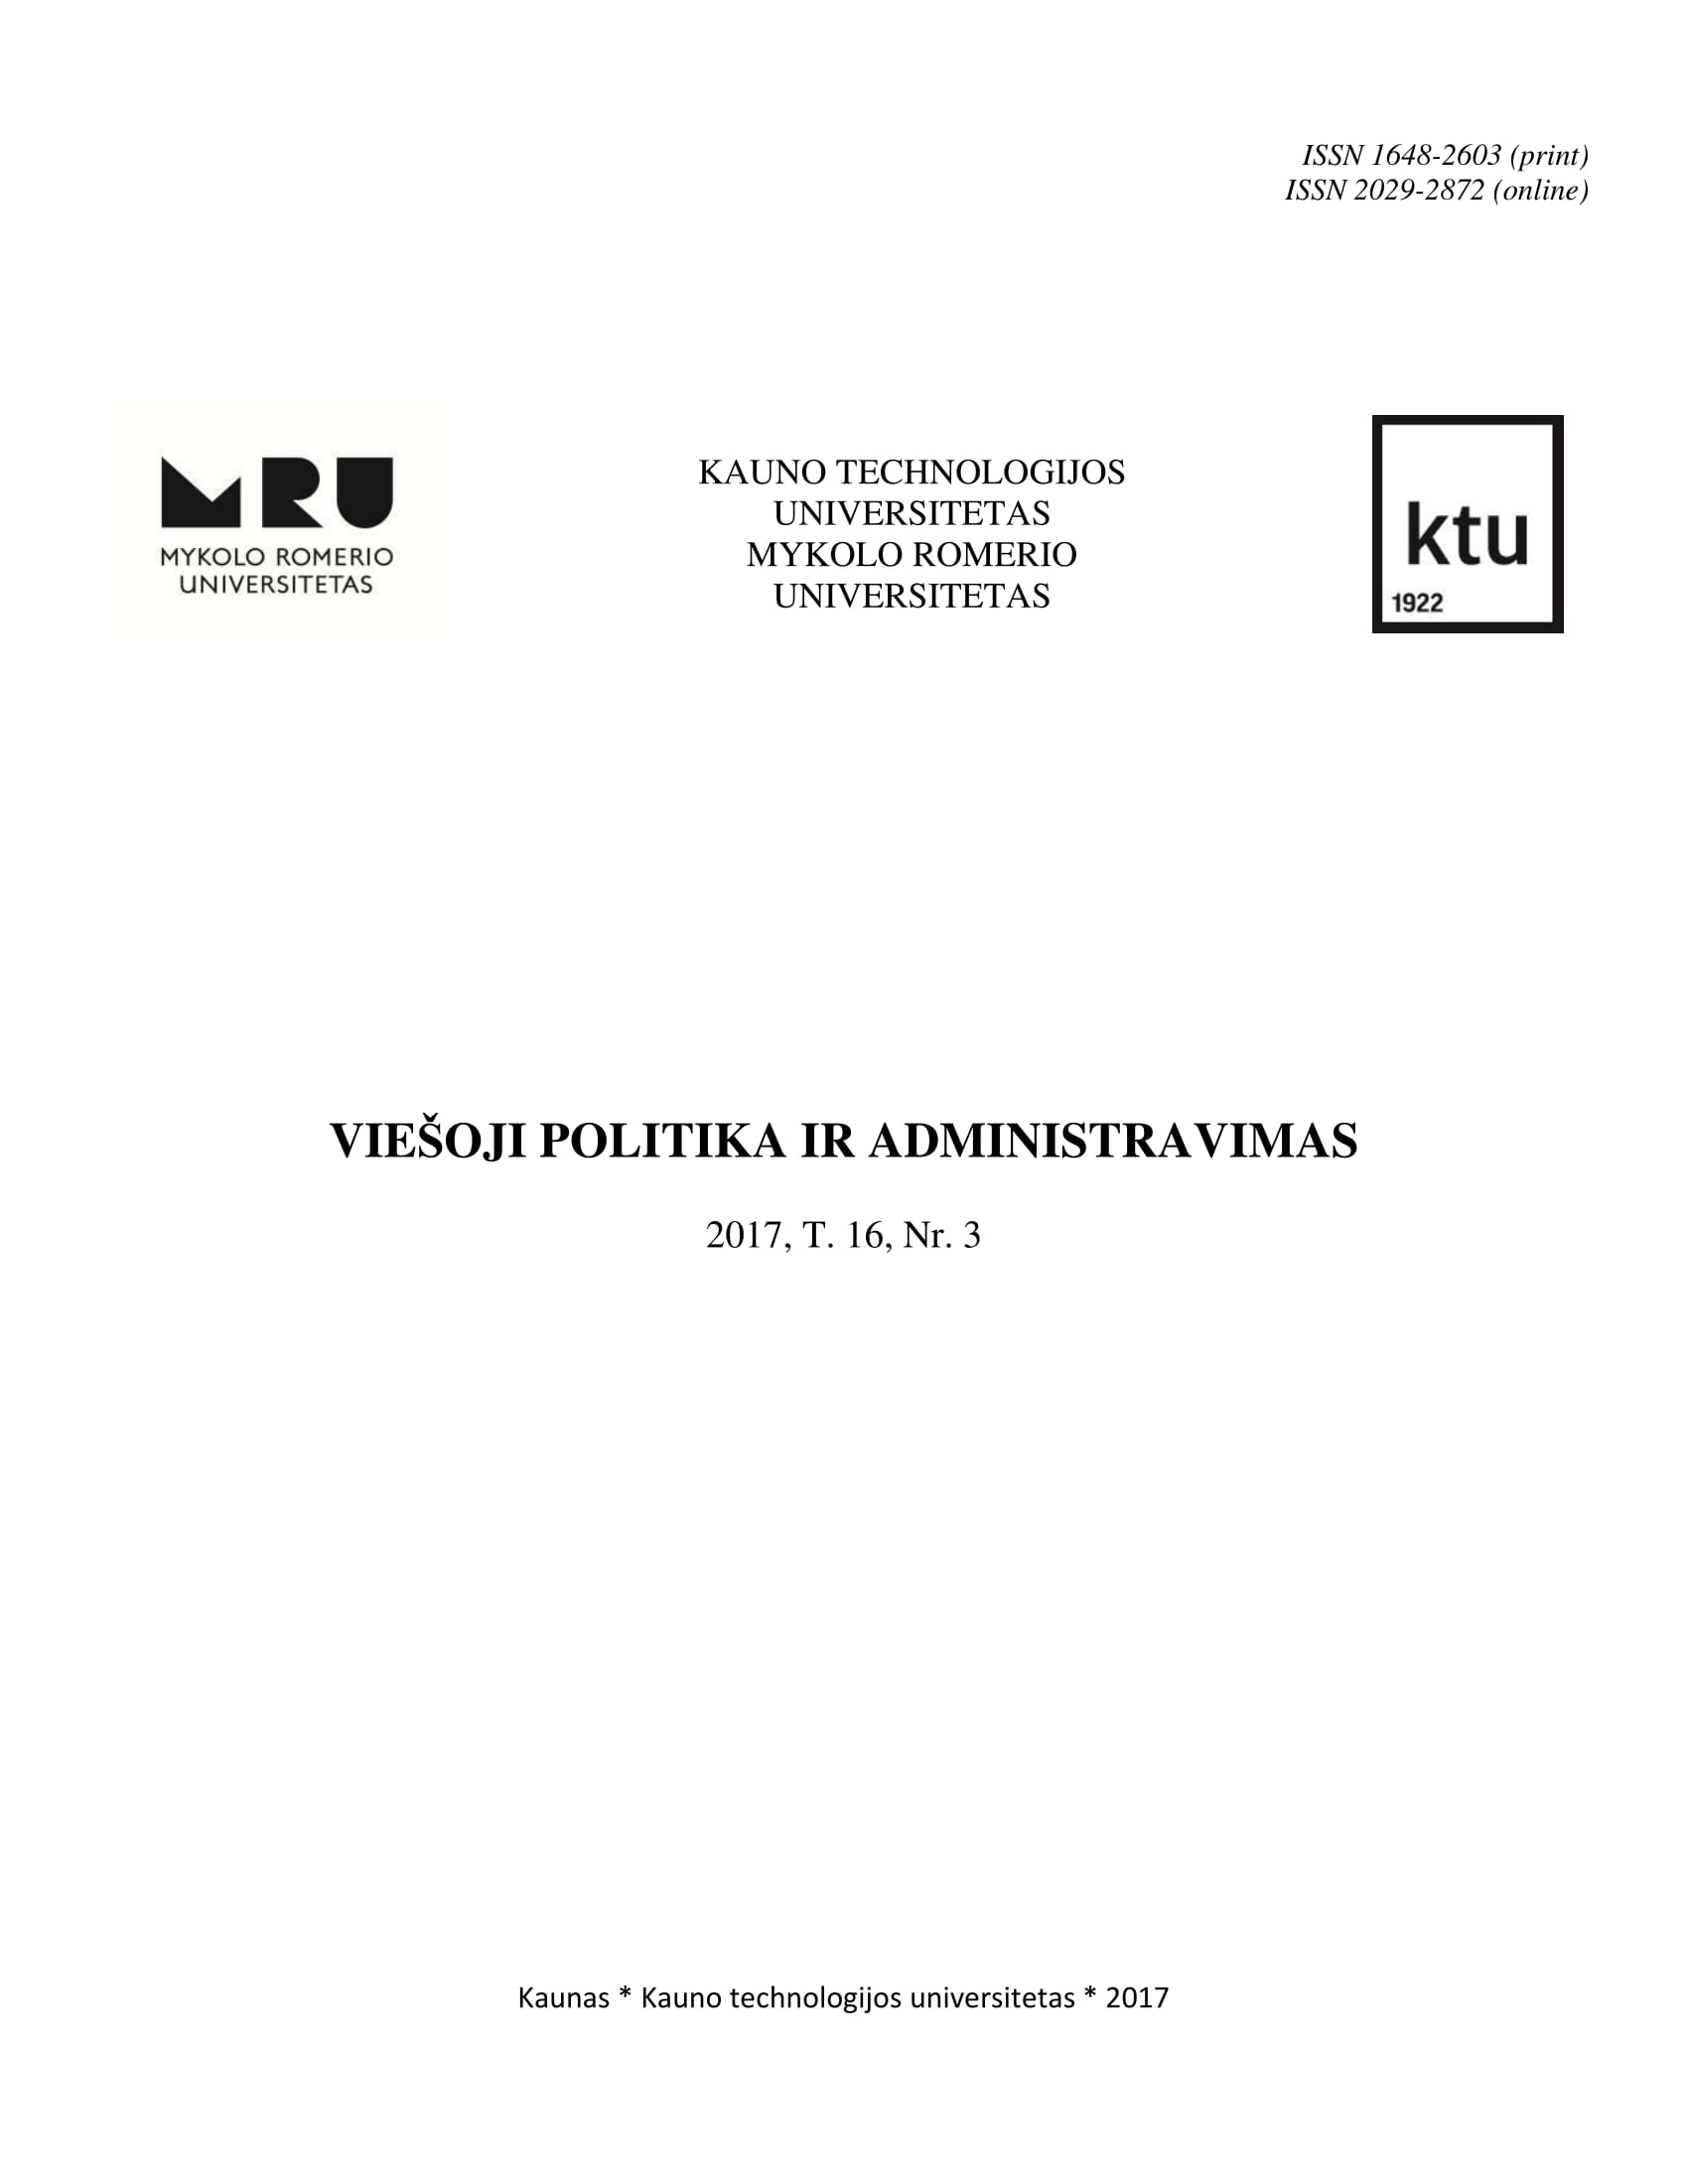 Professional Discretion of Civil Servants in Serving the Customers of Public Employment Intermediation Agency: The Case of Lithuanian Labour Exchange Cover Image